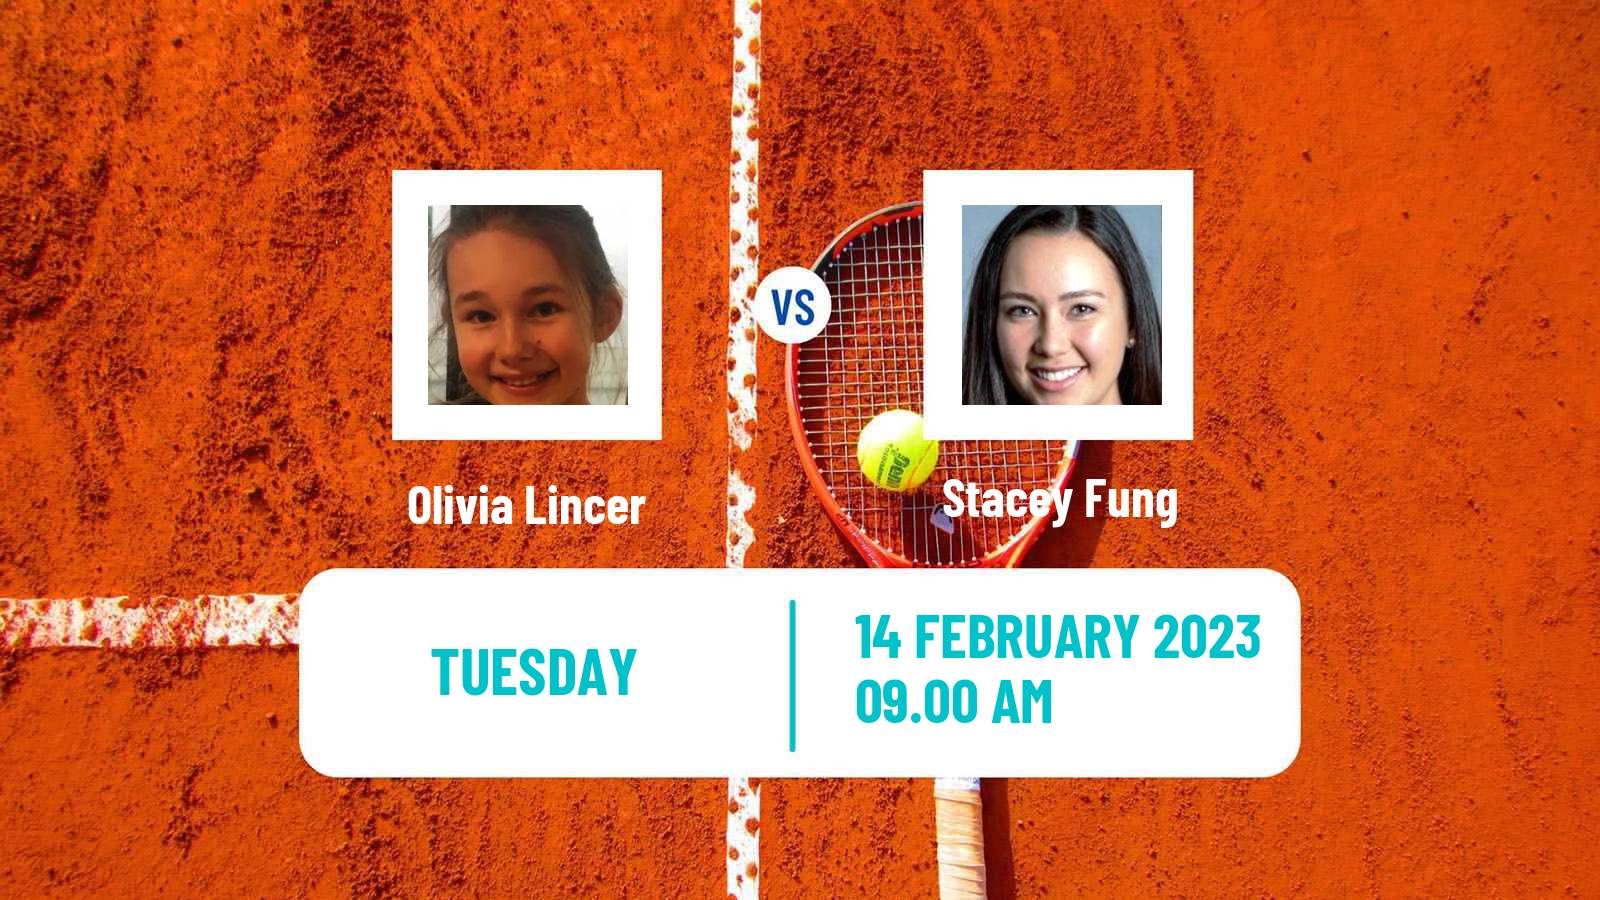 Tennis ITF Tournaments Olivia Lincer - Stacey Fung